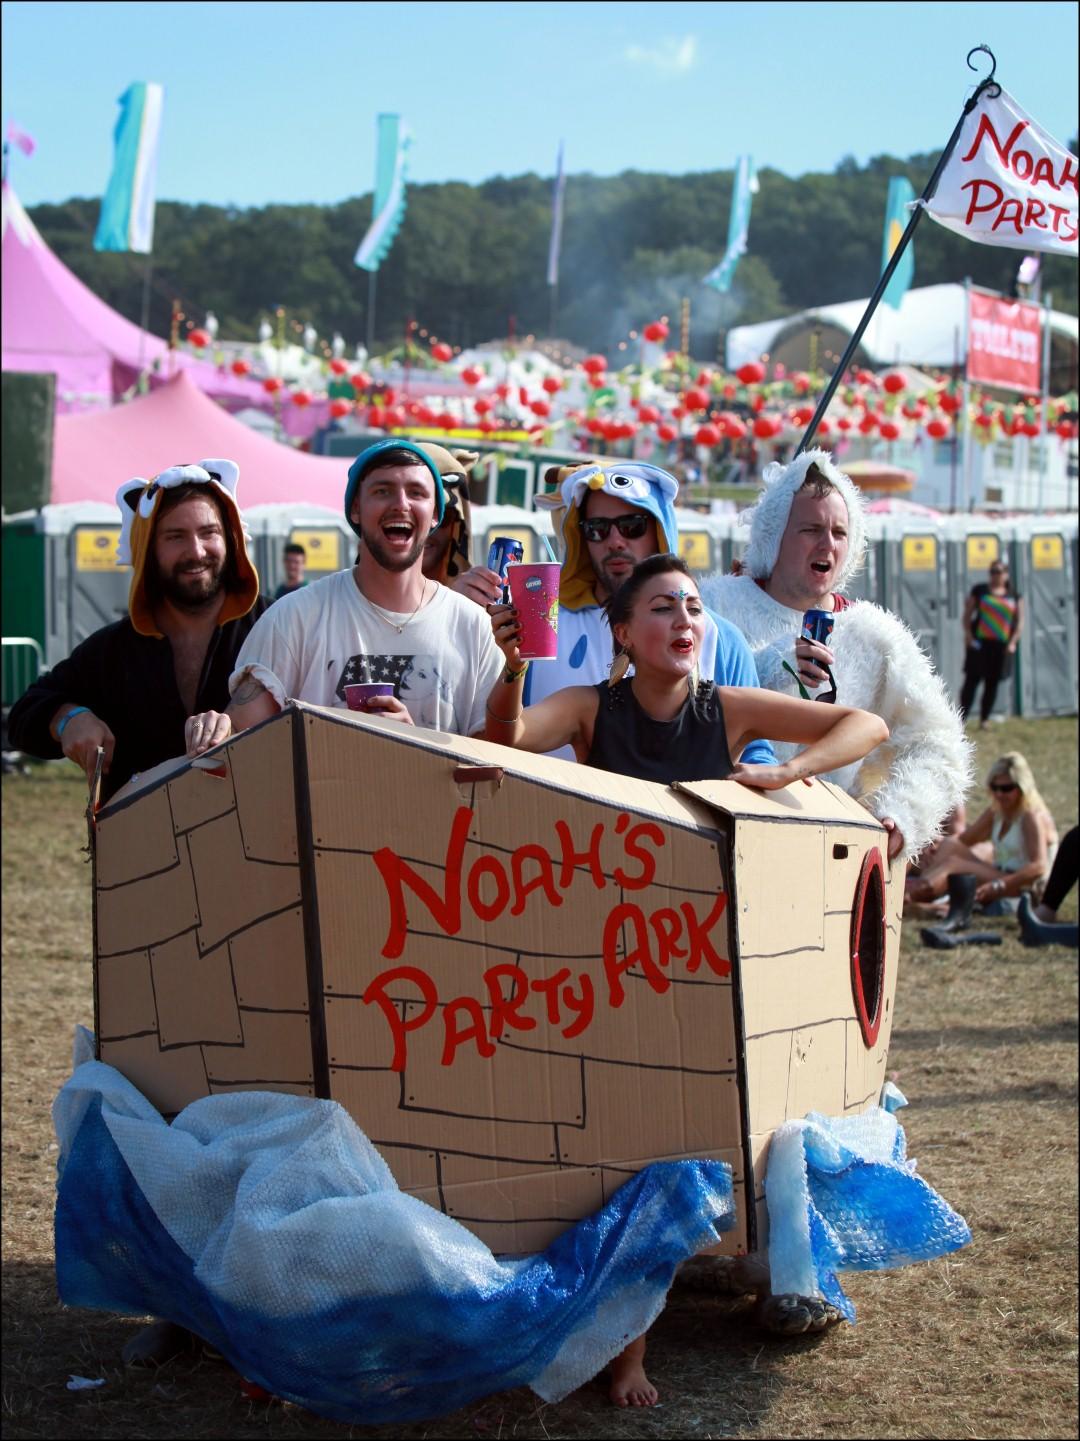 Picture from Bestival 2012.